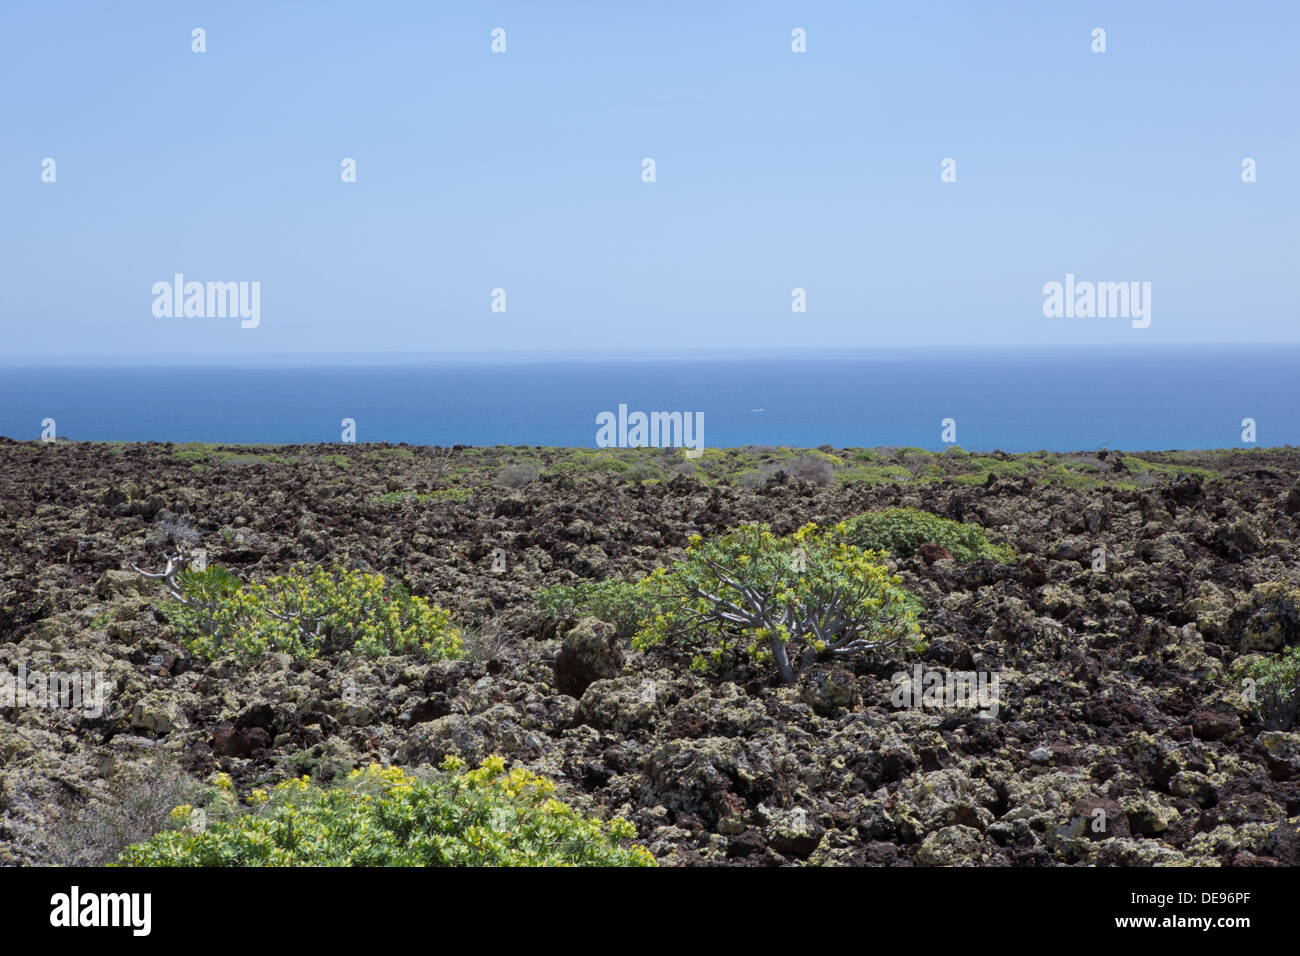 The picture belongs to a series of pictures from the holiday island of Lanzarote Stock Photo